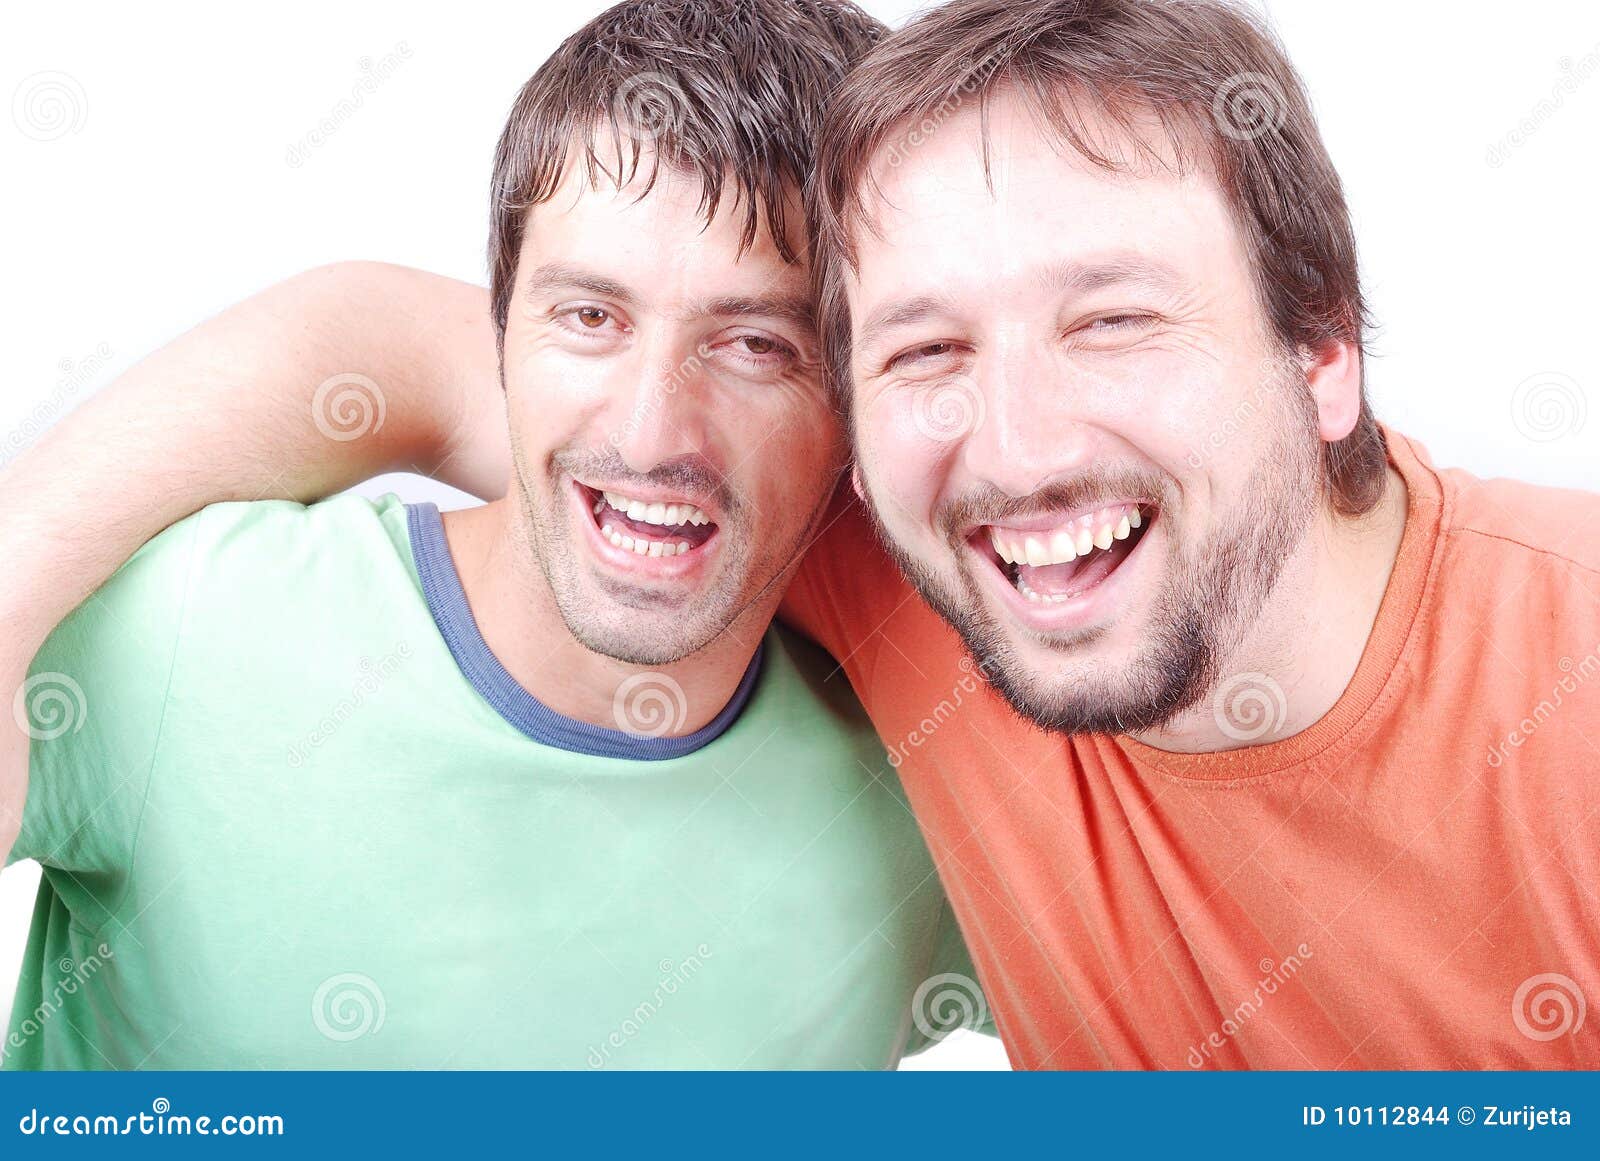 Two funny men are laughing stock photo. Image of lips - 10112844